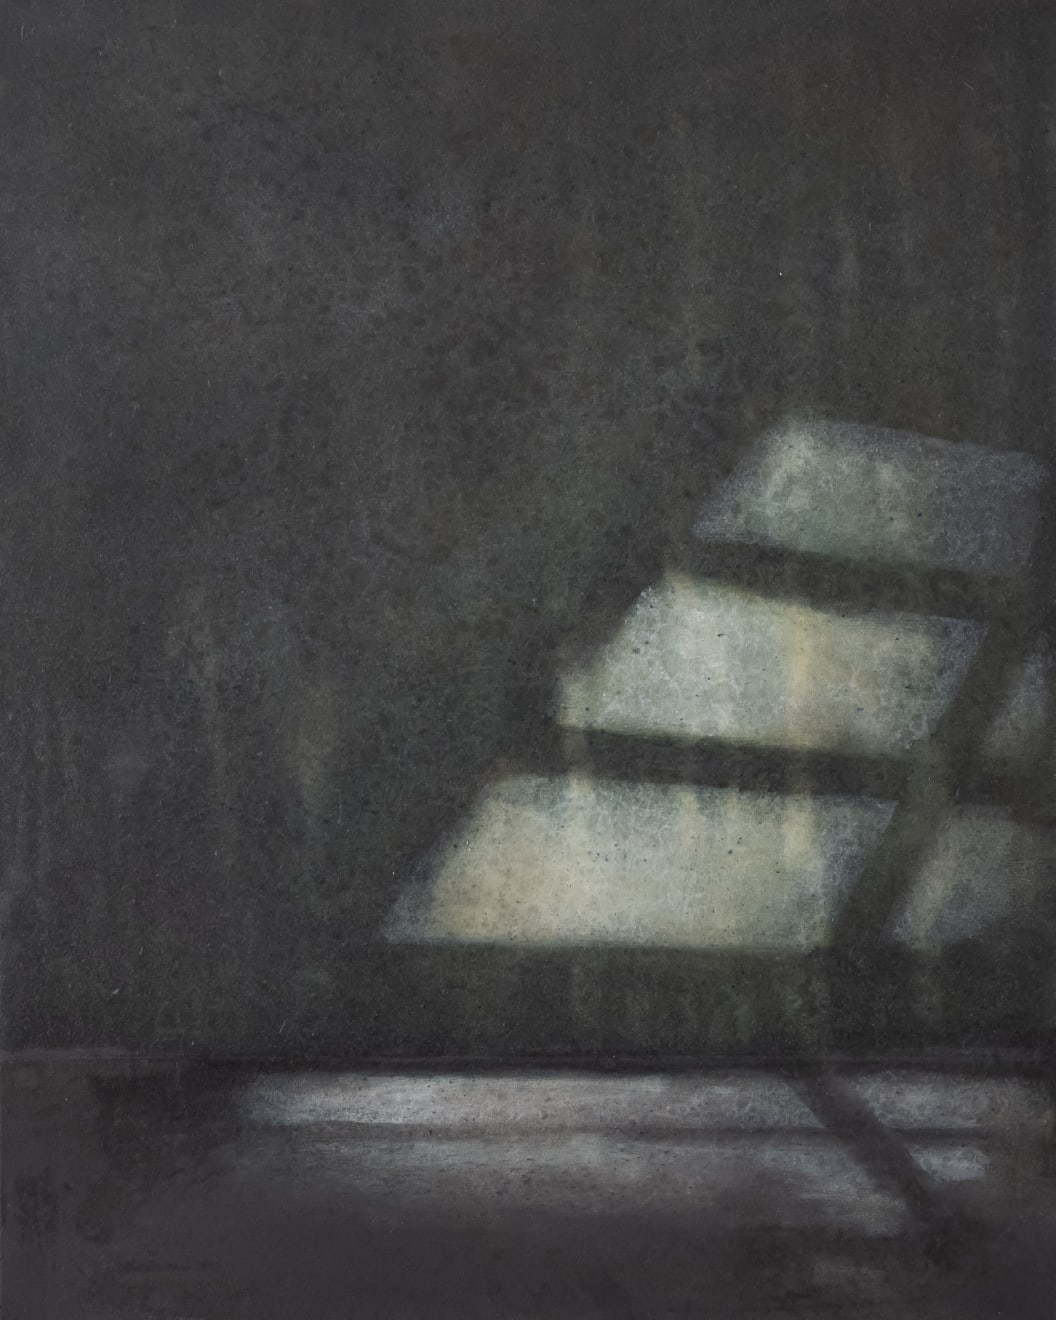 Remains of the Day VI Oil on Canvas Charcoal Shadow Box Frame 81.5 x 102cm $ 5,400.00